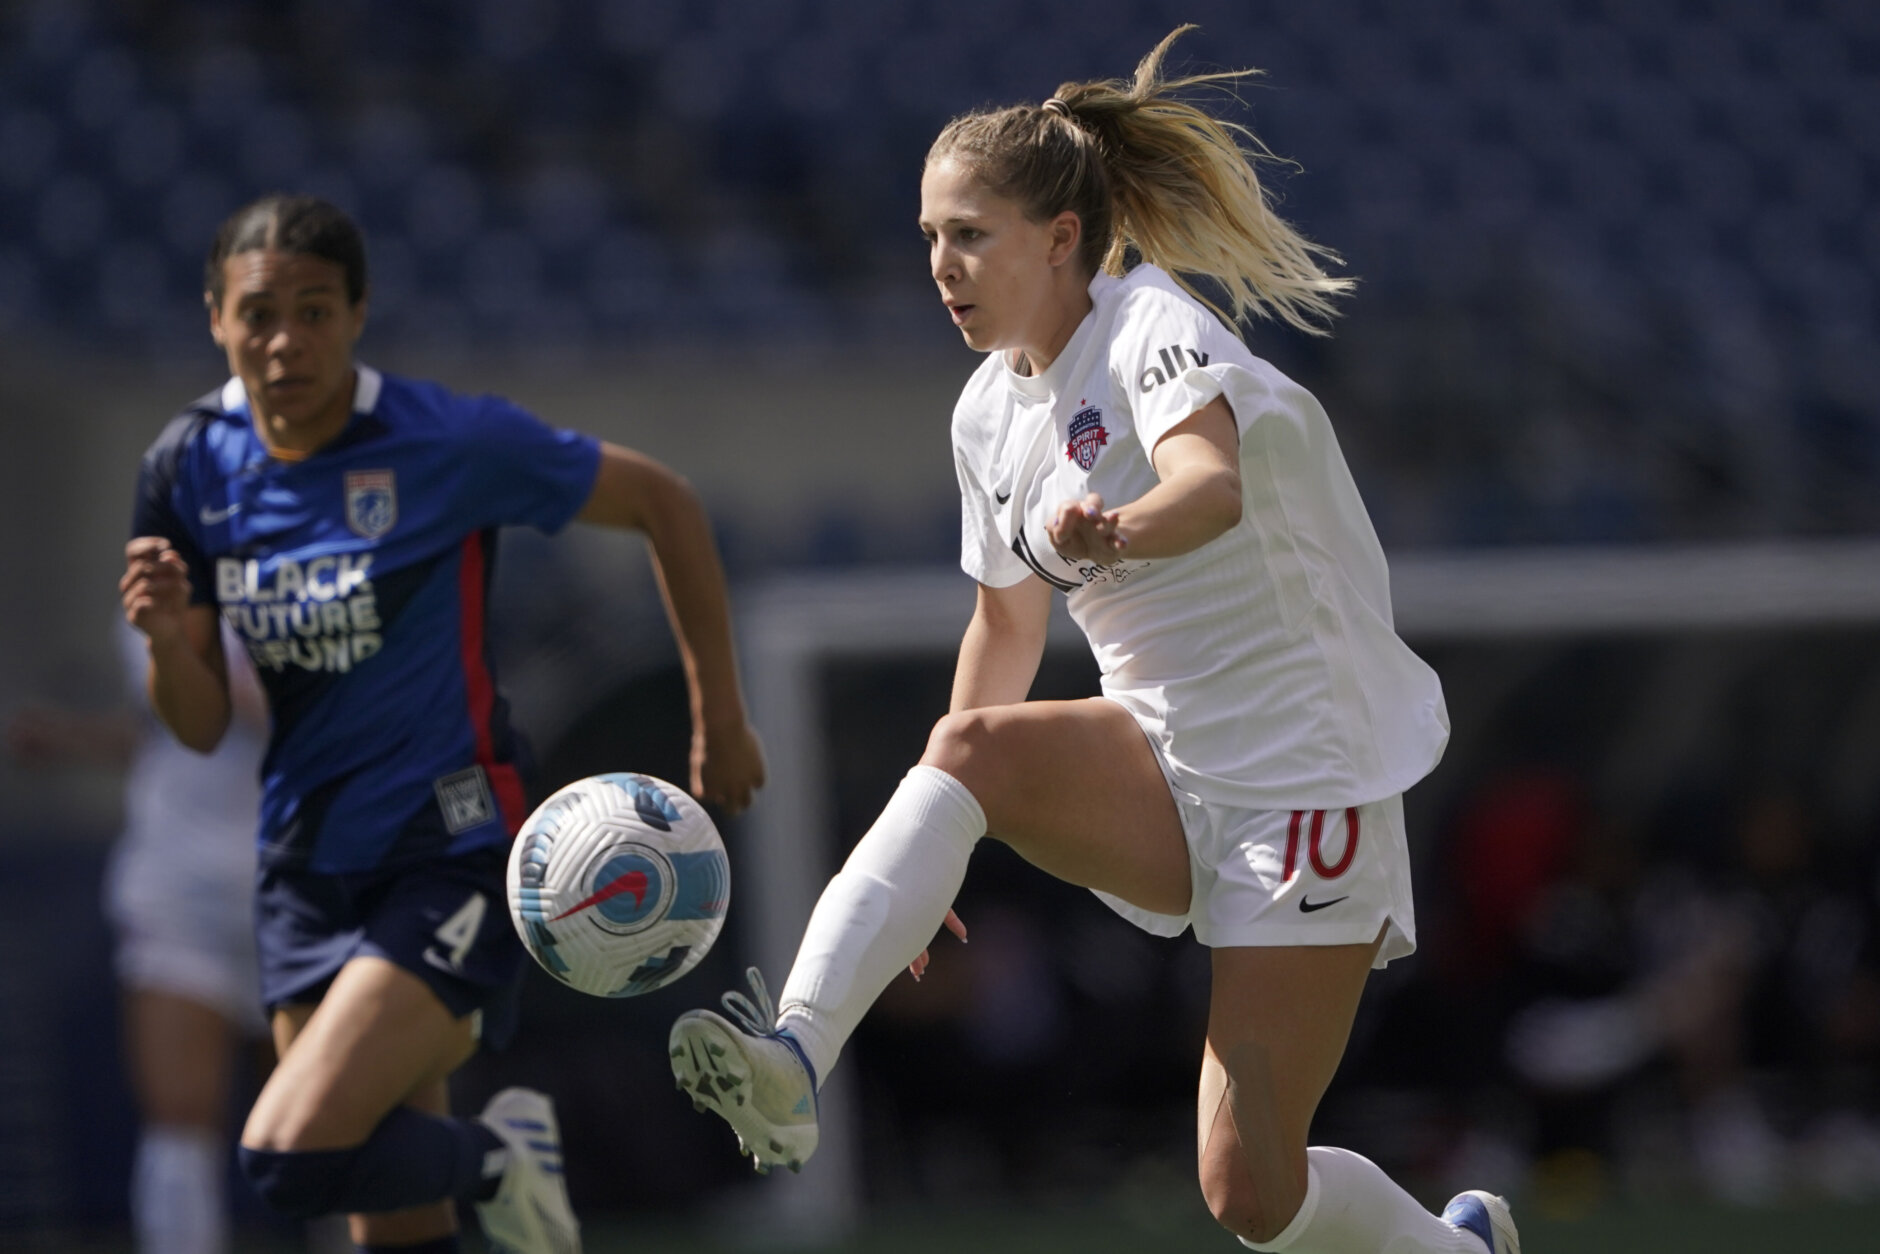 Washington Spirit forward Ashley Sanchez right, kicks the ball in front of OL Reign defender Alana Cook, left, during the first half of an NWSL soccer match, Sunday, May 22, 2022, in Seattle. (AP Photo/Ted S. Warren)